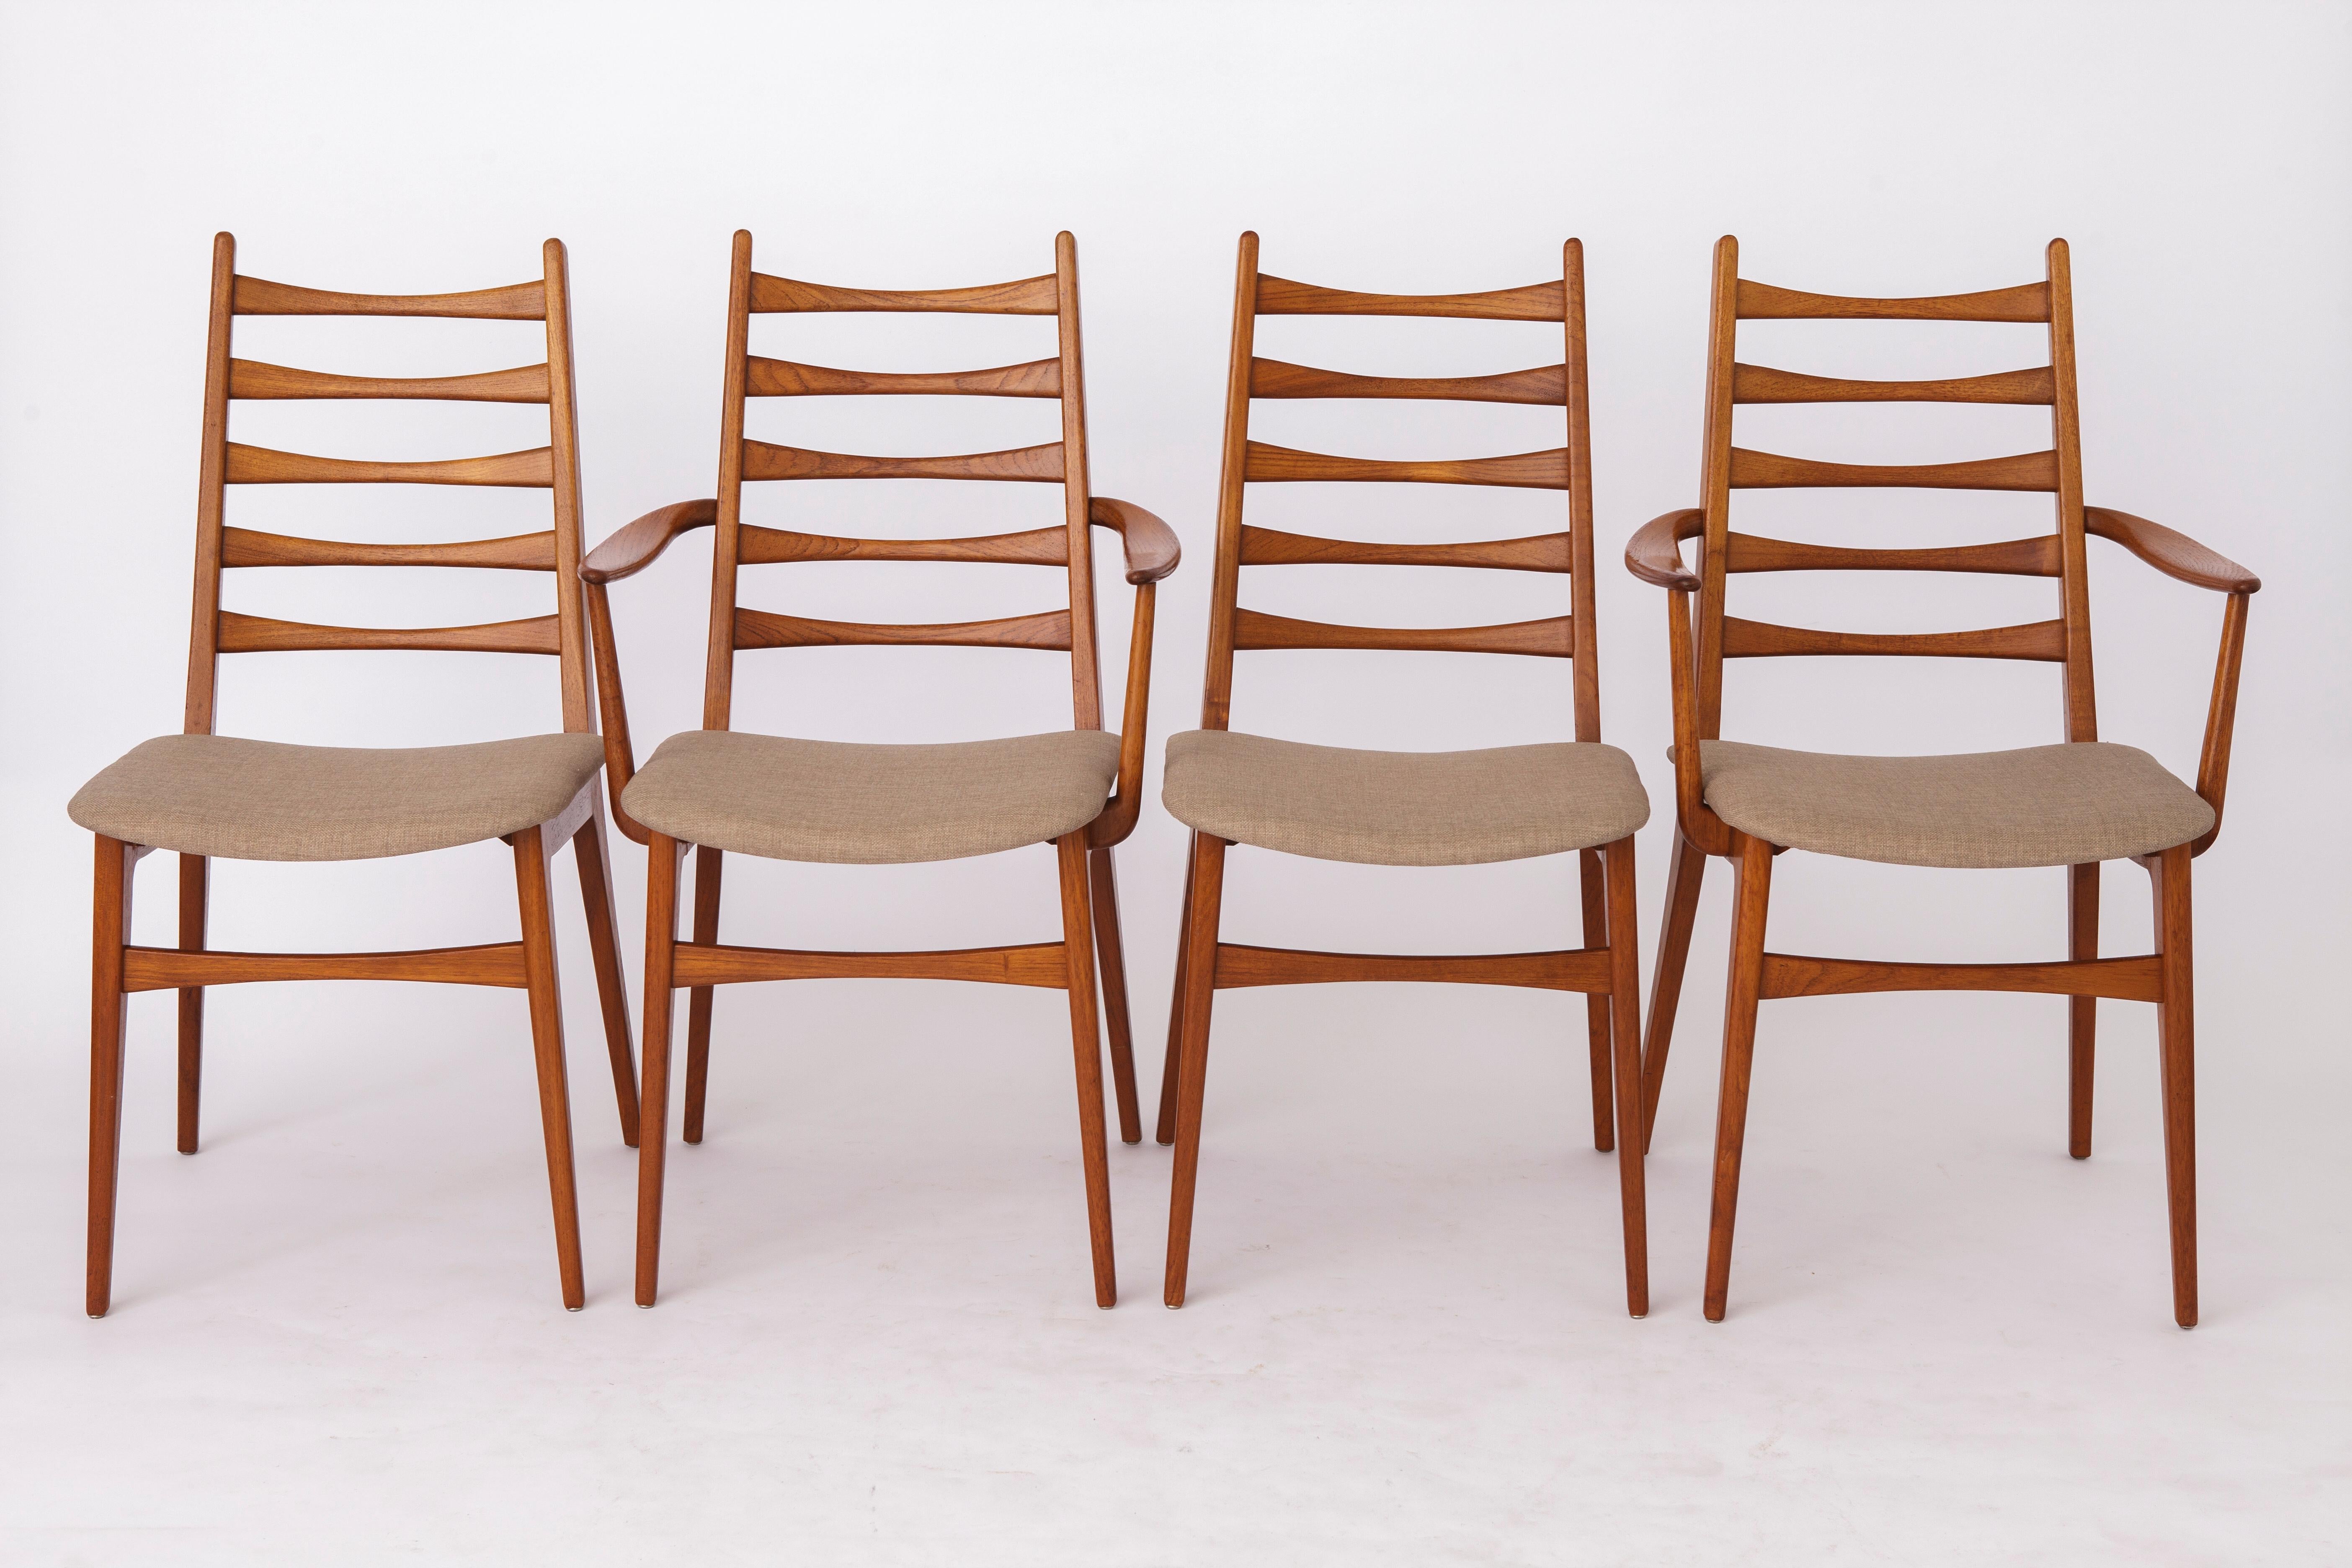 Polished 6 Mid century dining chairs, 1960s, Germany, Teak, Vintage